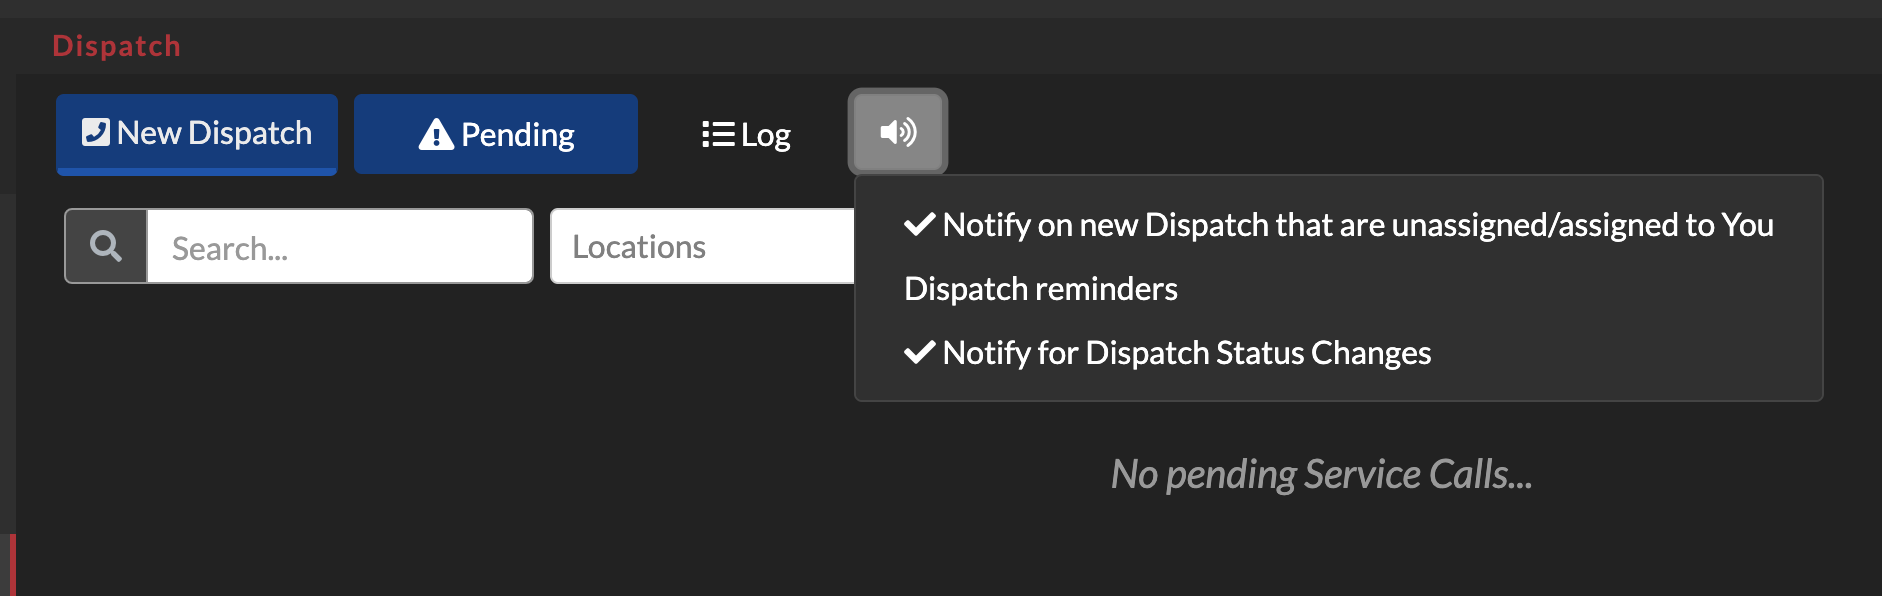 Dispatch Notification button showing different possible settings.